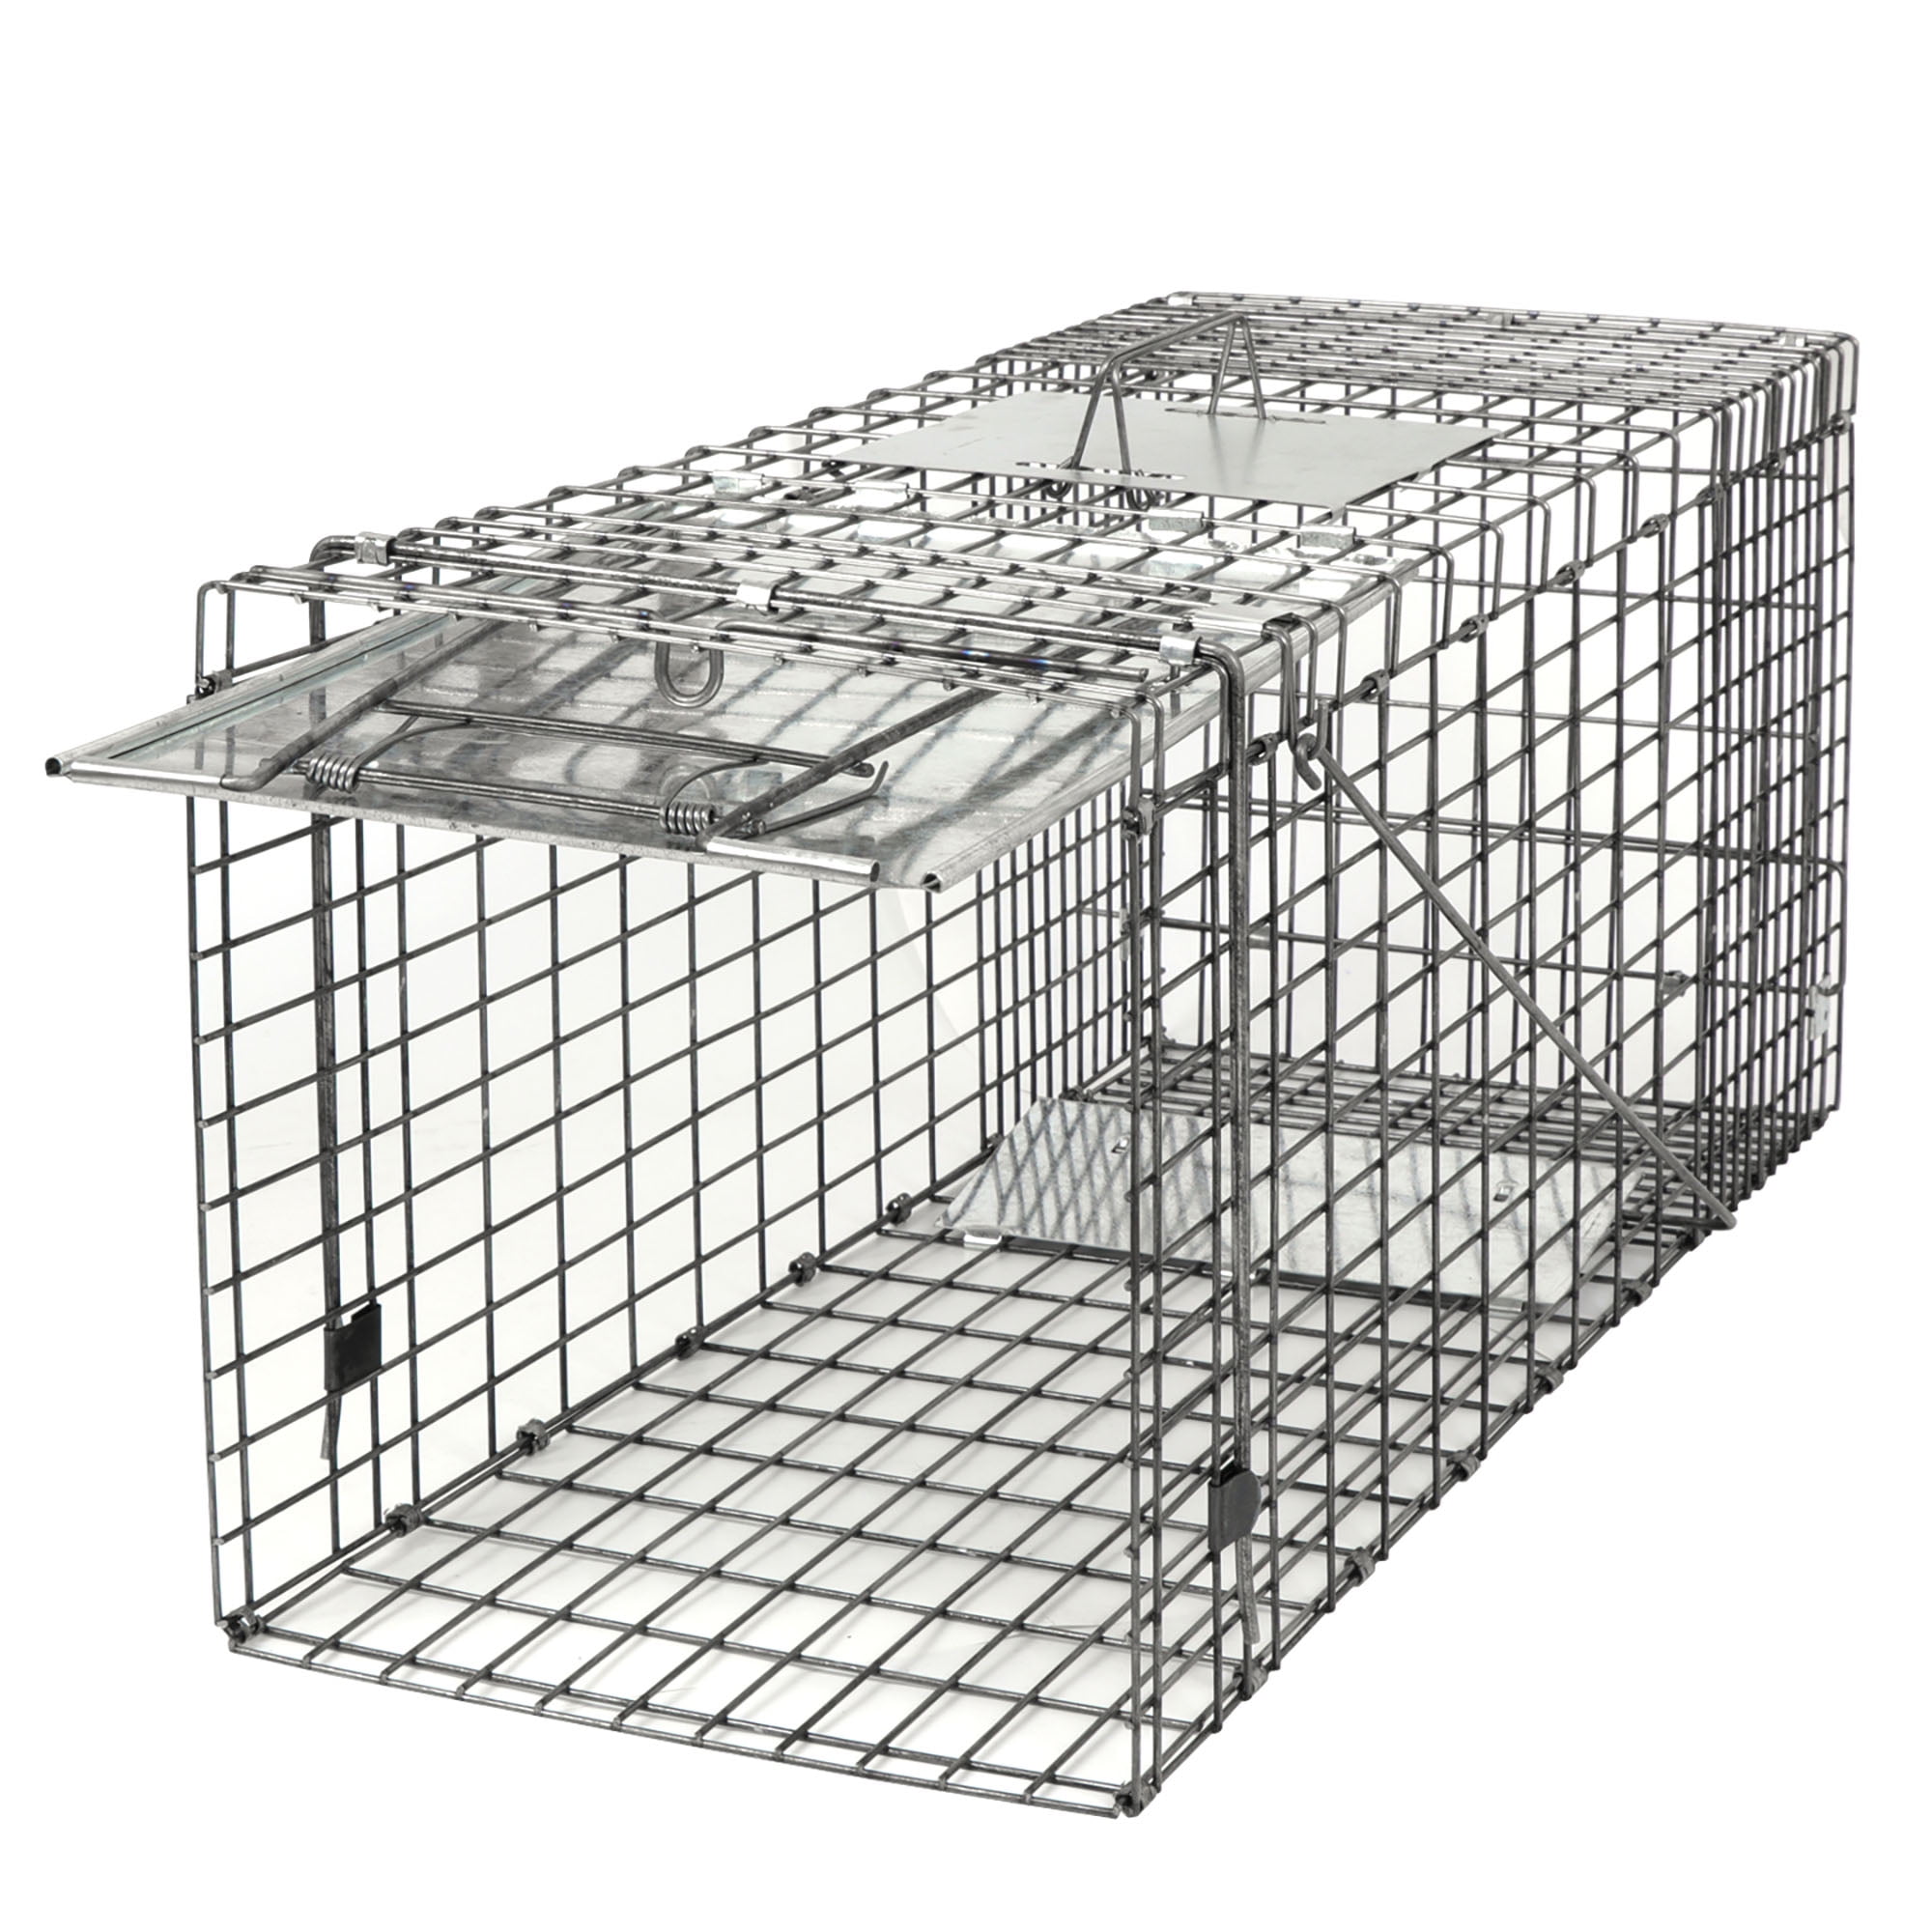 ZENY Live Animal Cage Trap 32 X 12.5 X 12 w/Iron Door Steel Cage Catch  Release Humane Rodent Cage for Rabbits, Stray Cat, Squirrel, Raccoon, Mole